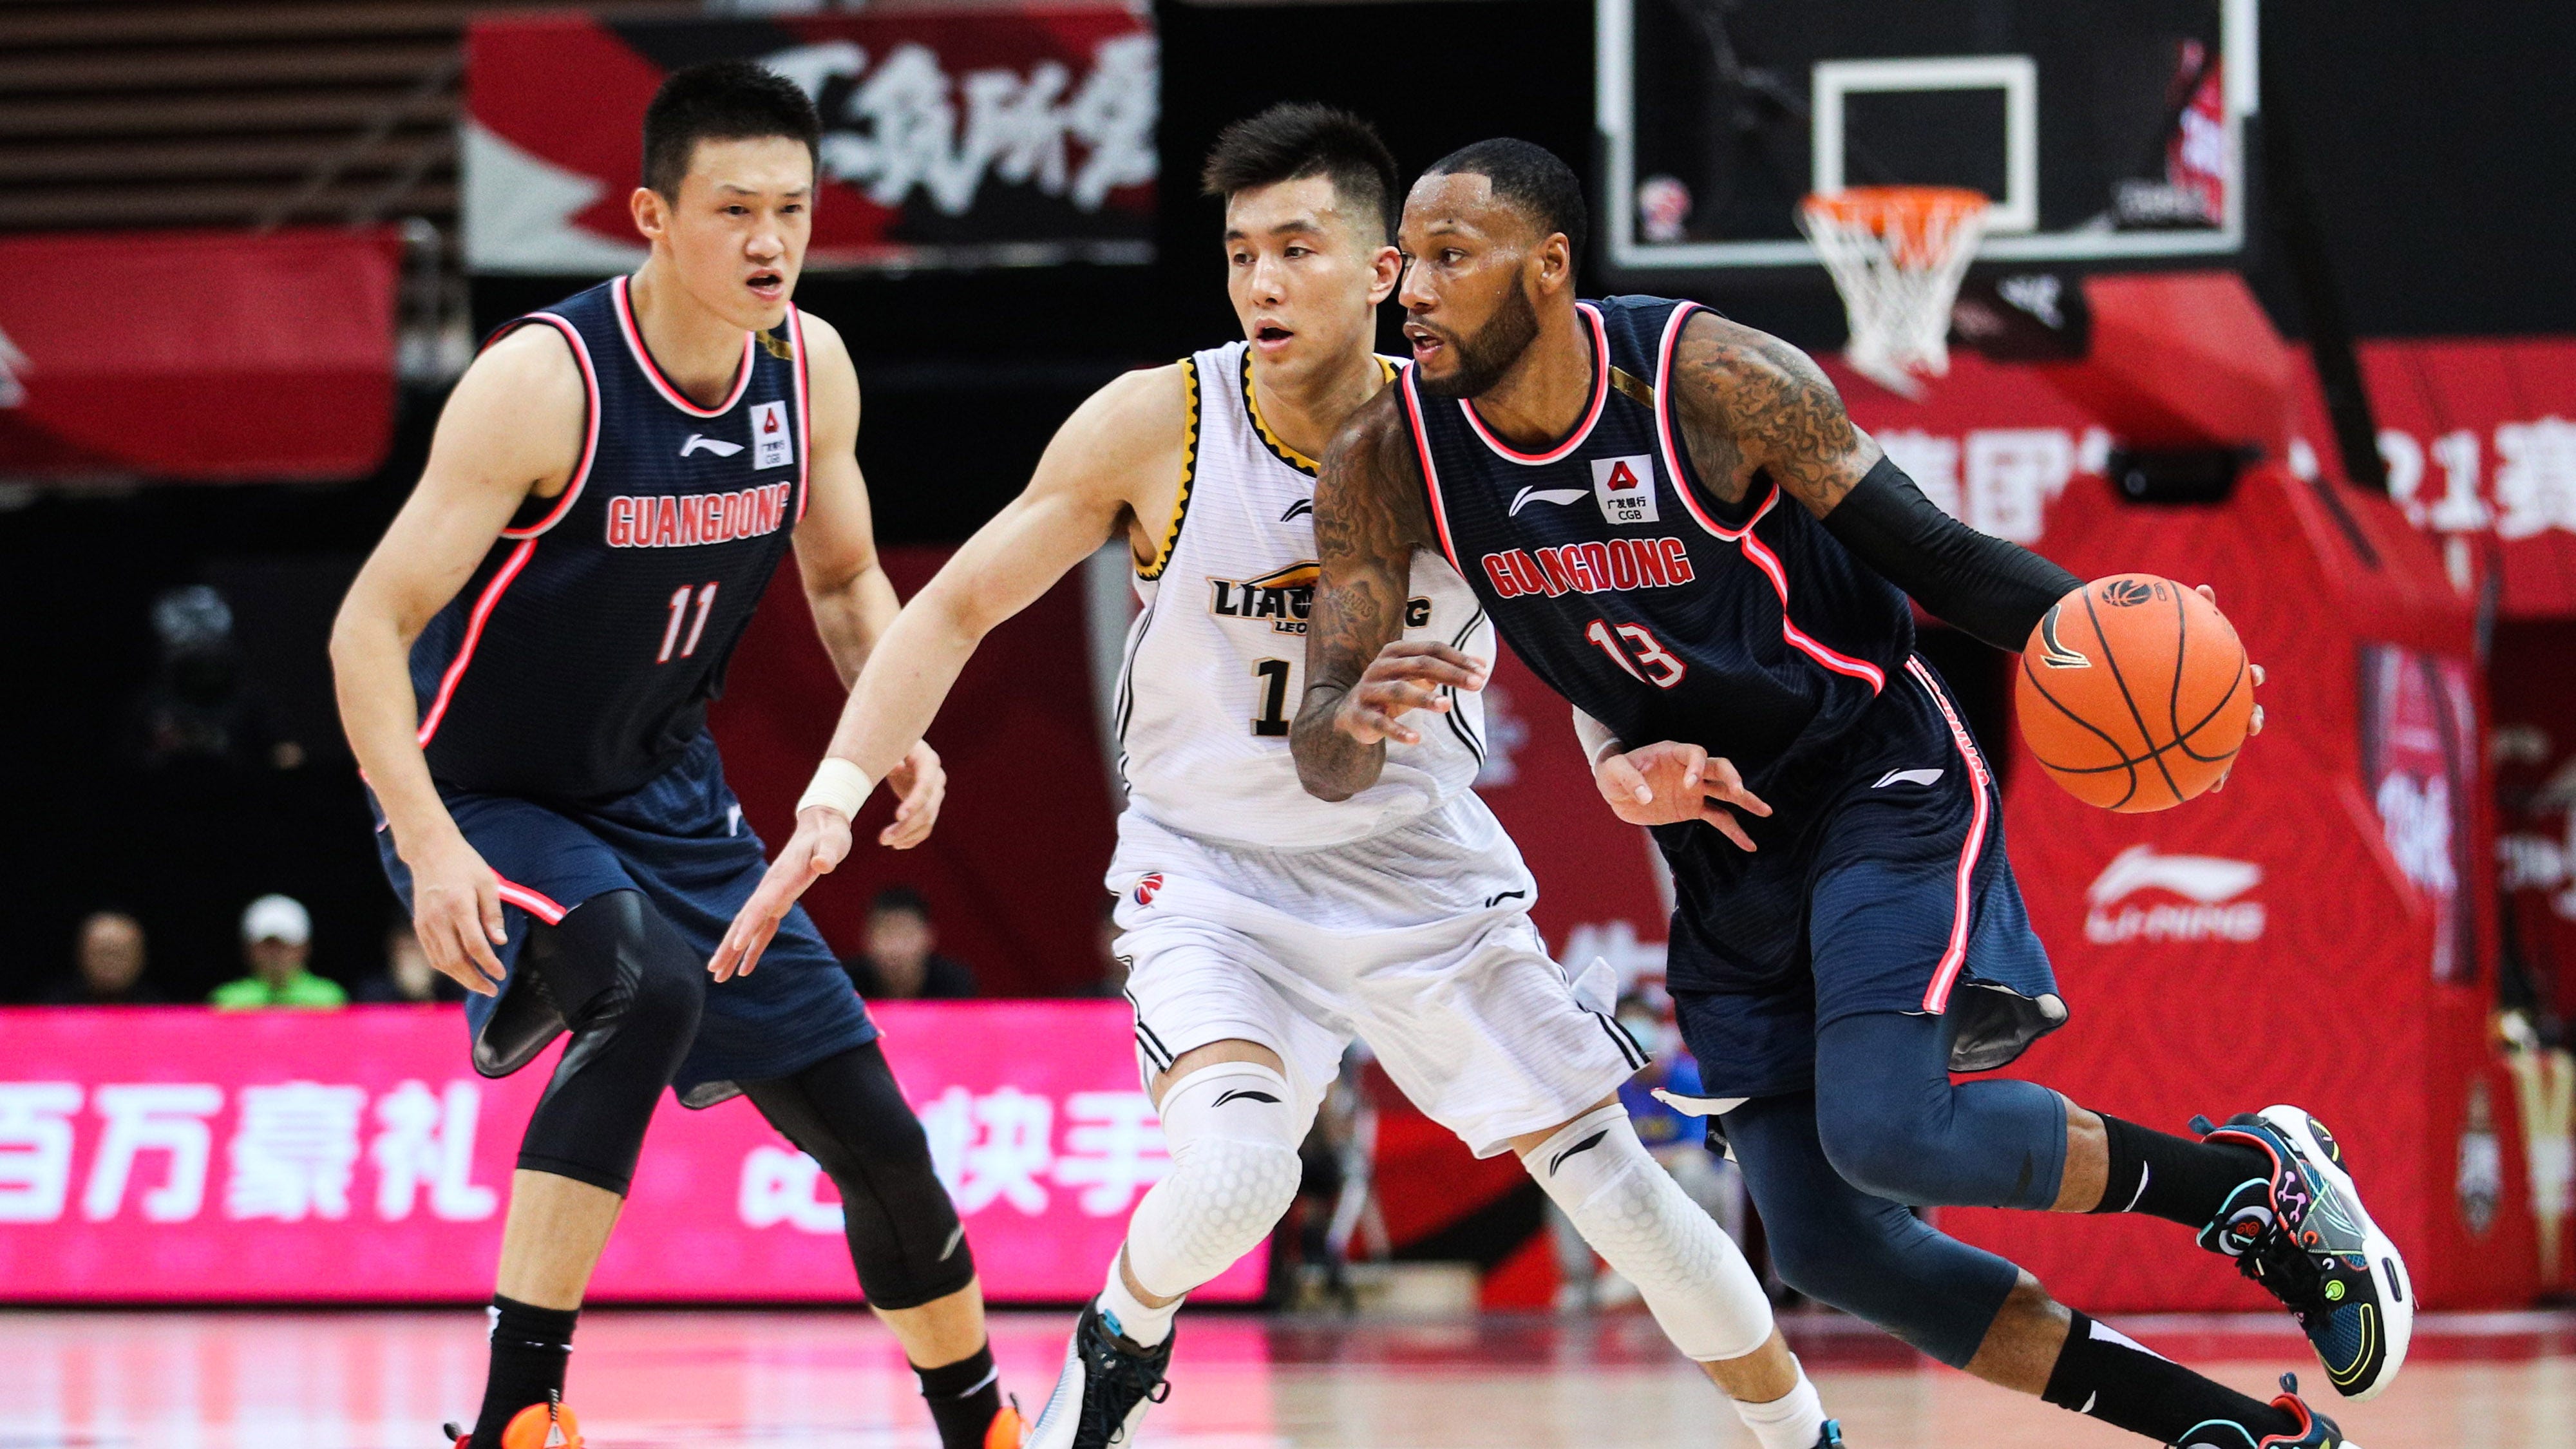 Former NBA player Sonny Weems targeted in China by angry fans shouting racial slurs, vulgarities